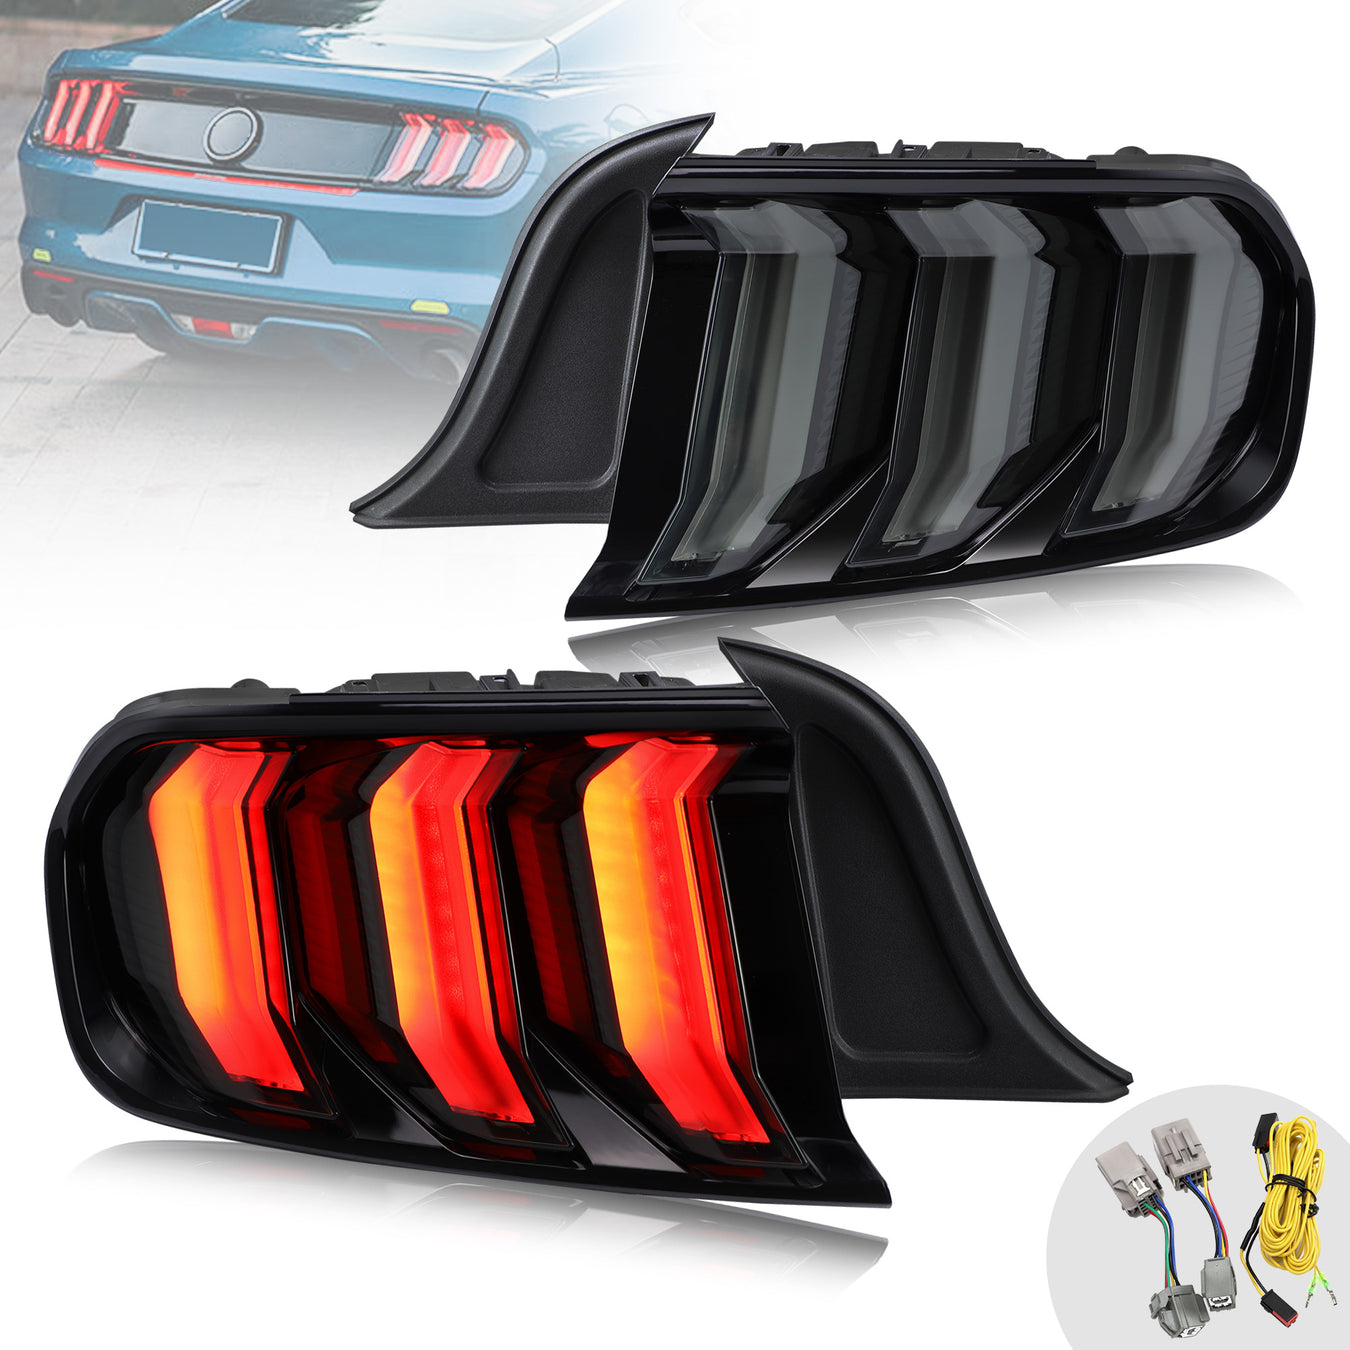 American cars taillights